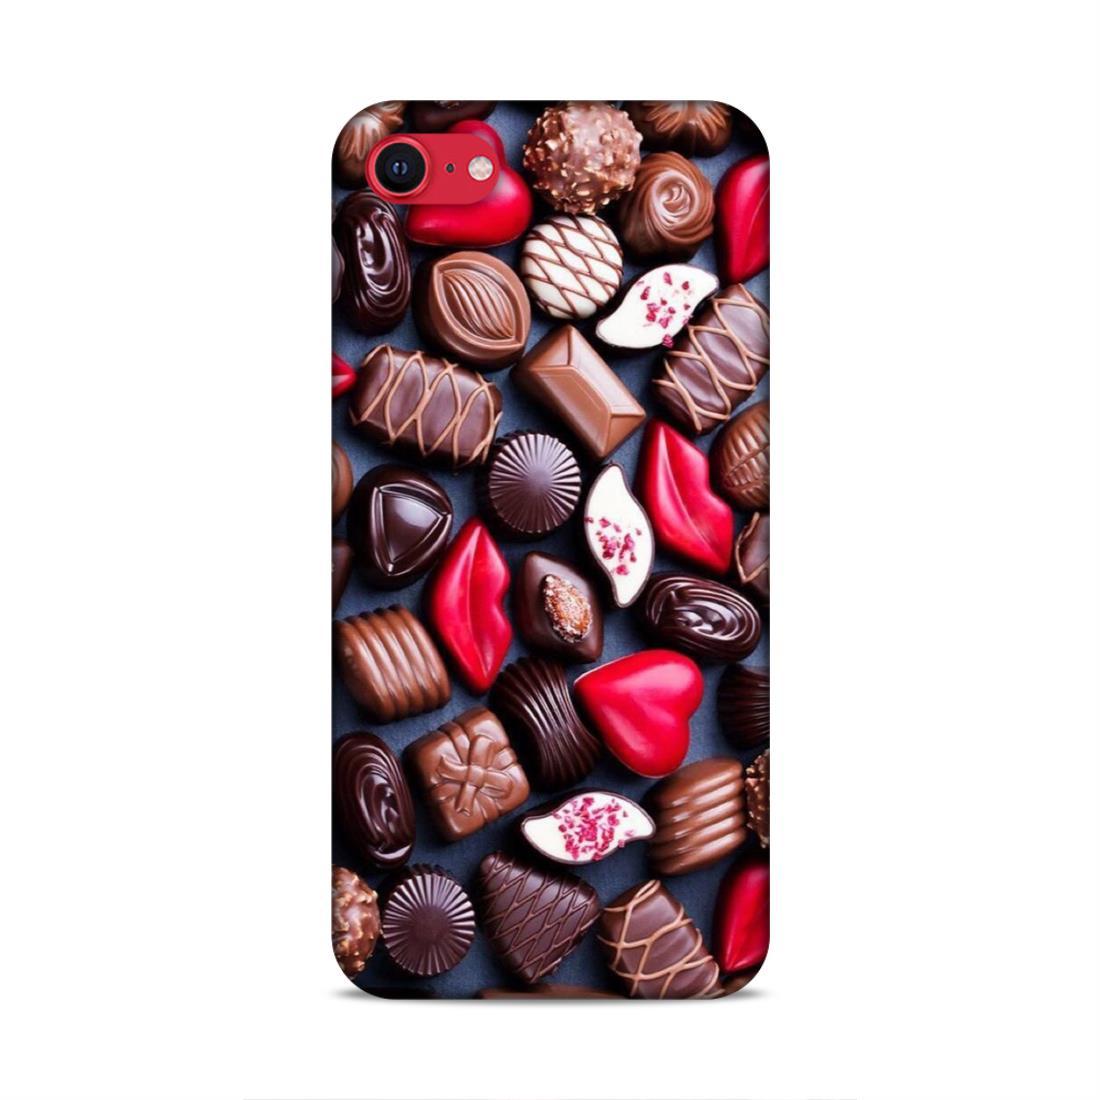 Chocolate Heart iPhone SE 2020 Phone Case Cover